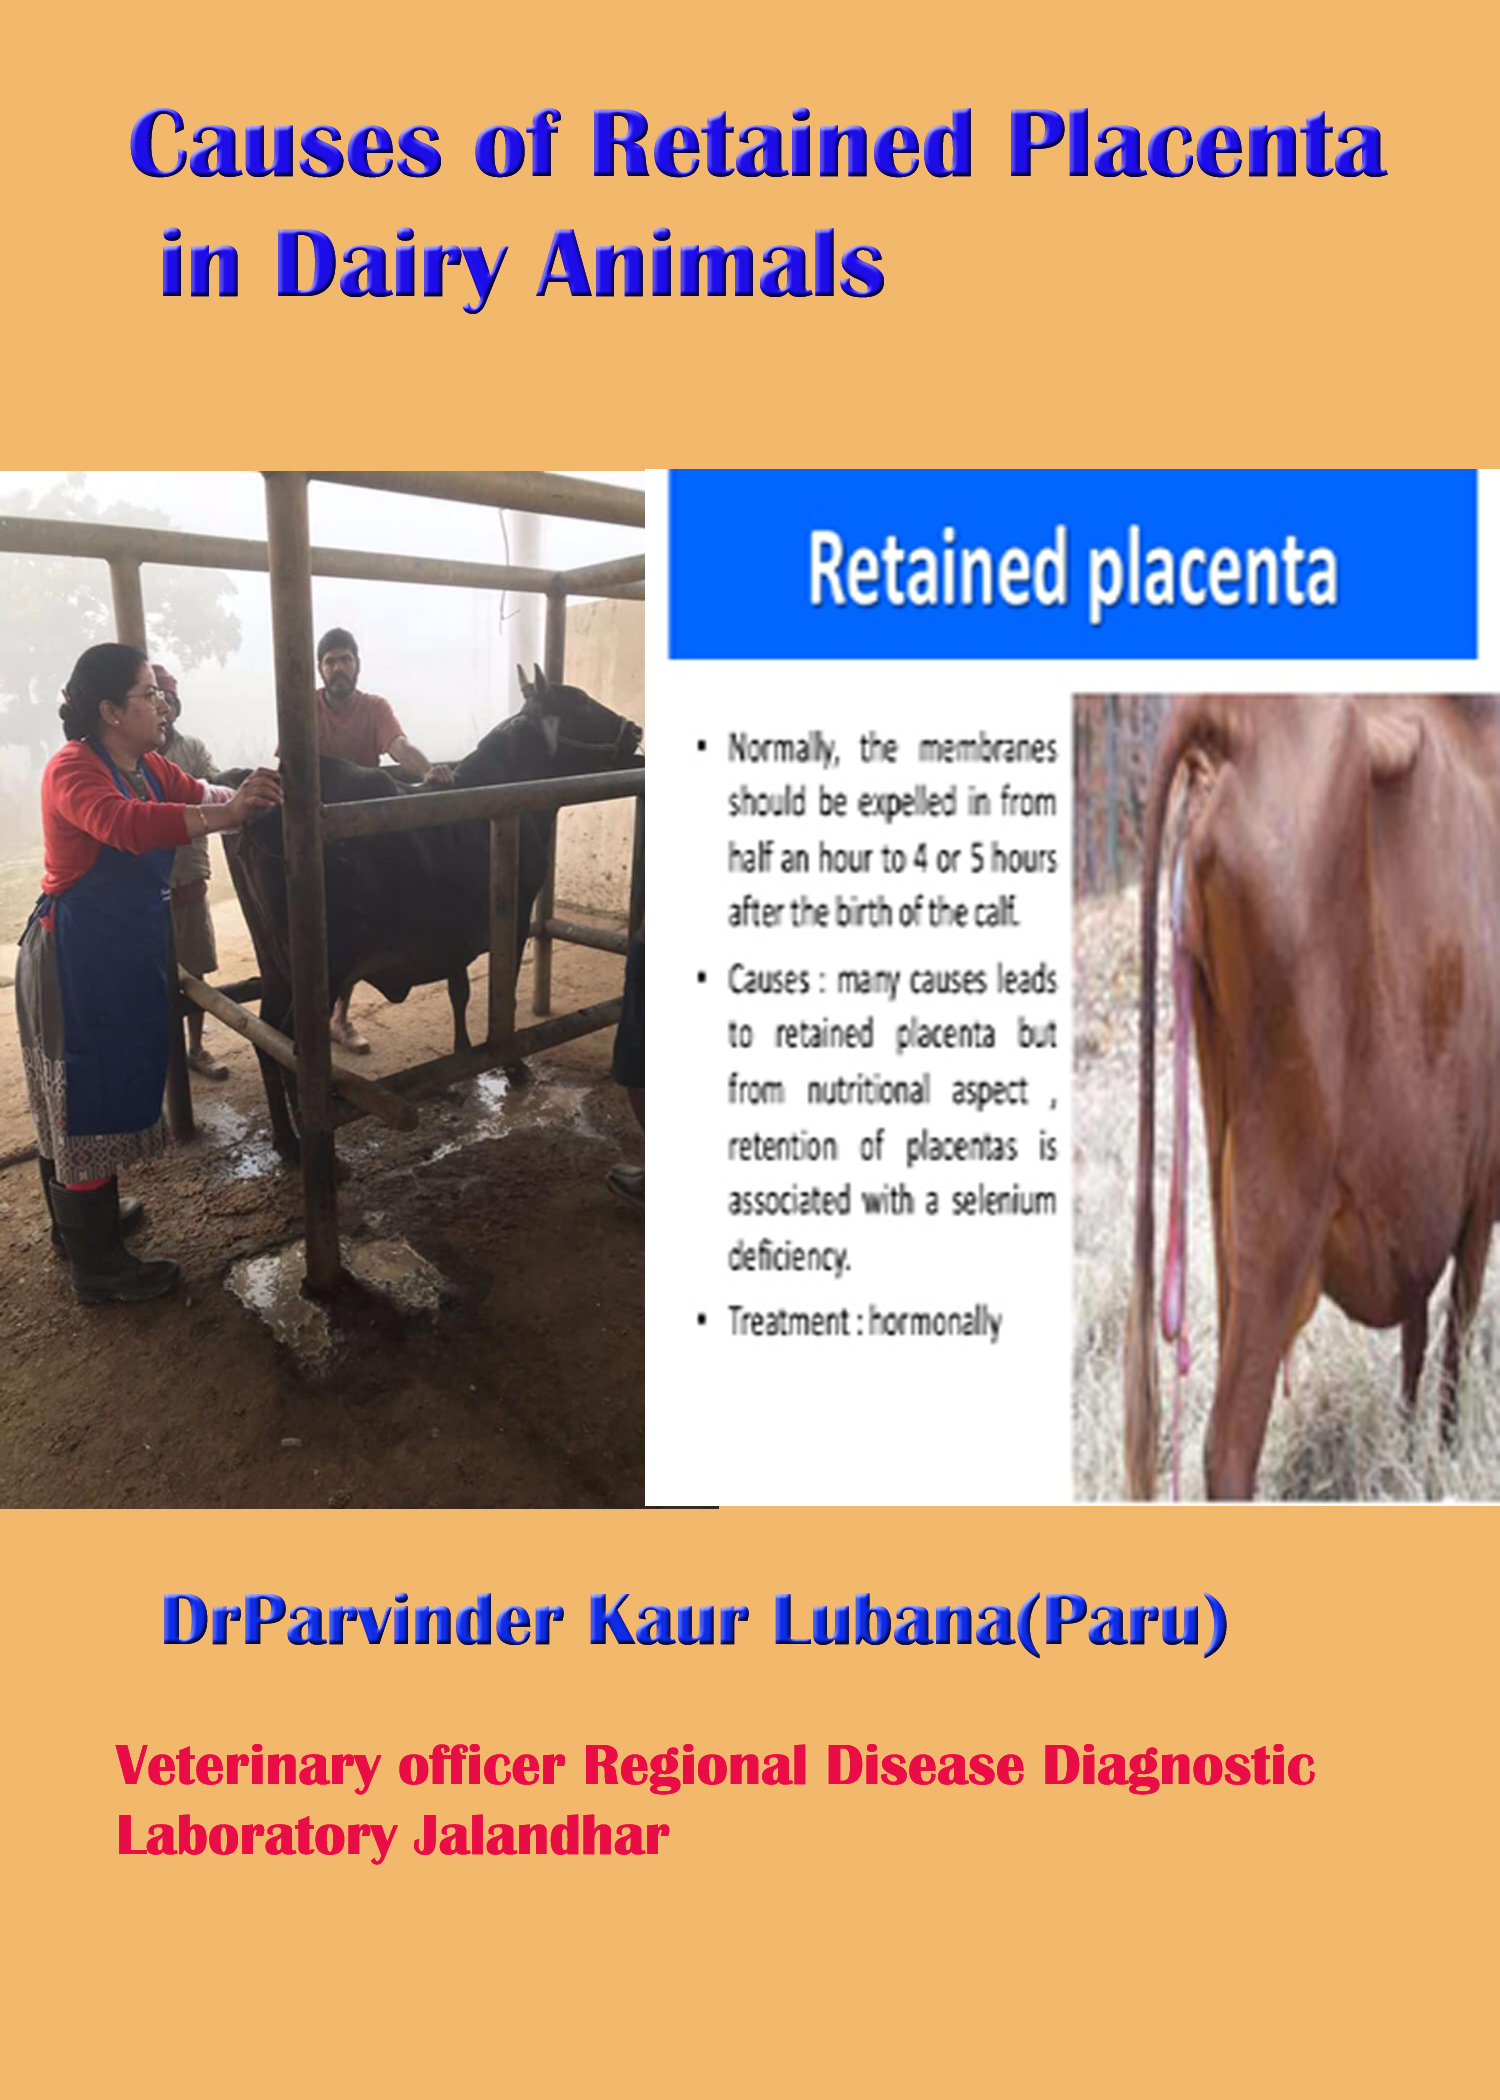 Causes of Retained Placenta in Dairy Animals – Pashudhan praharee